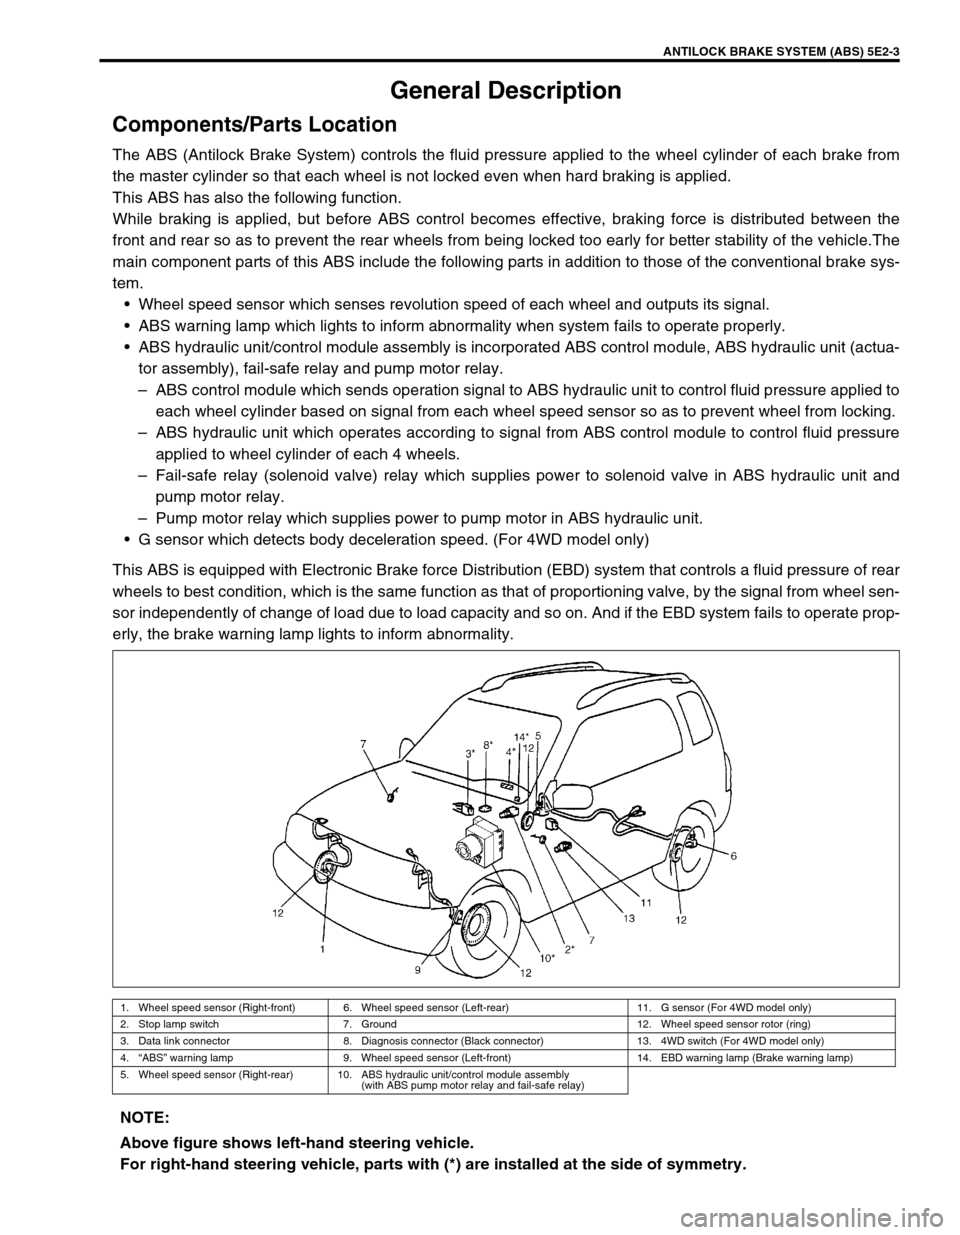 SUZUKI GRAND VITARA 1999 2.G User Guide ANTILOCK BRAKE SYSTEM (ABS) 5E2-3
General Description
Components/Parts Location
The ABS (Antilock Brake System) controls the fluid pressure applied to the wheel cylinder of each brake from
the master 